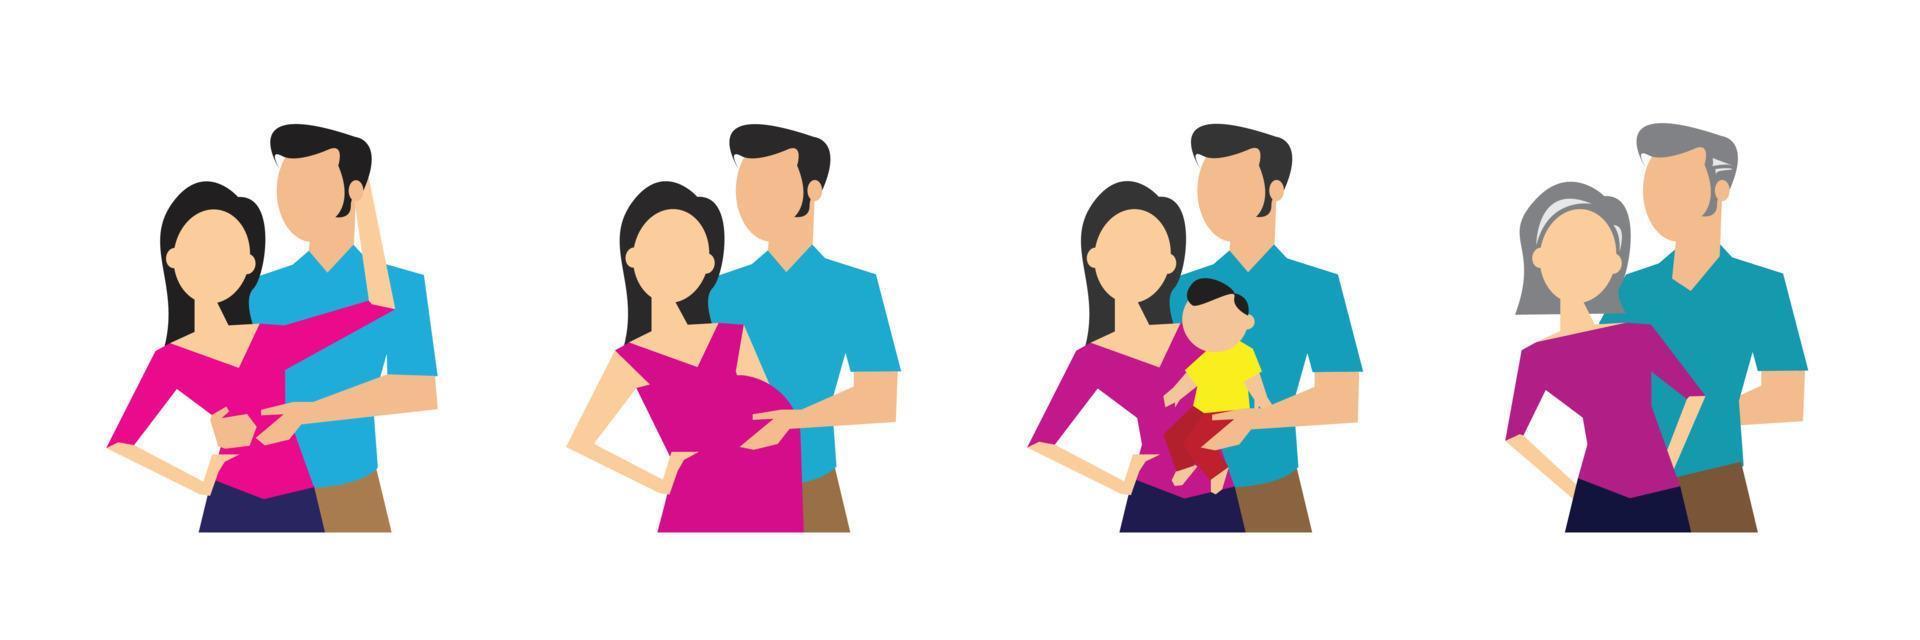 Developmental stages of the family generation. Vector illustration